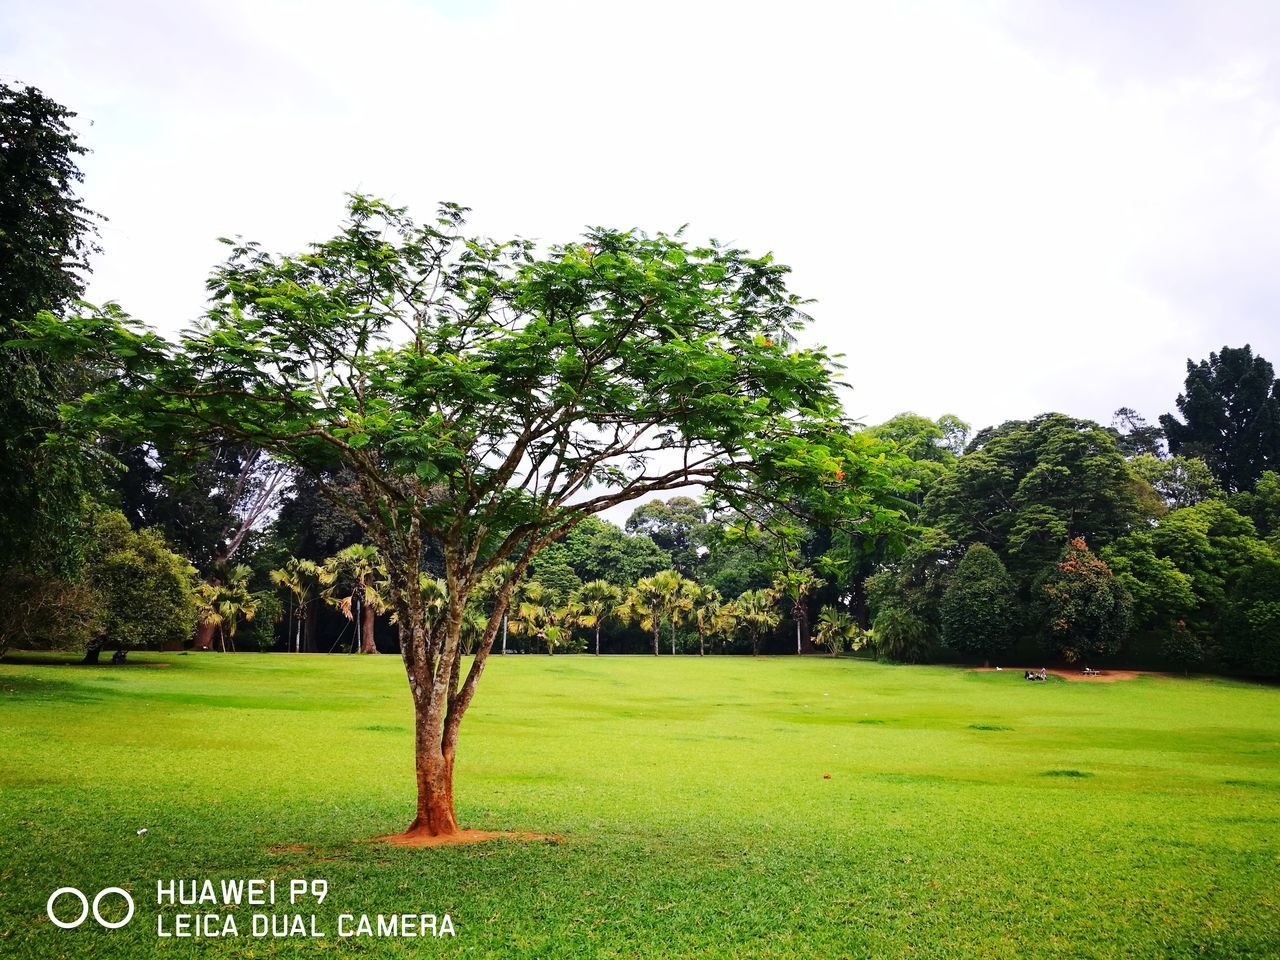 tree, grass, green color, growth, field, no people, nature, outdoors, day, landscape, beauty in nature, sky, green - golf course